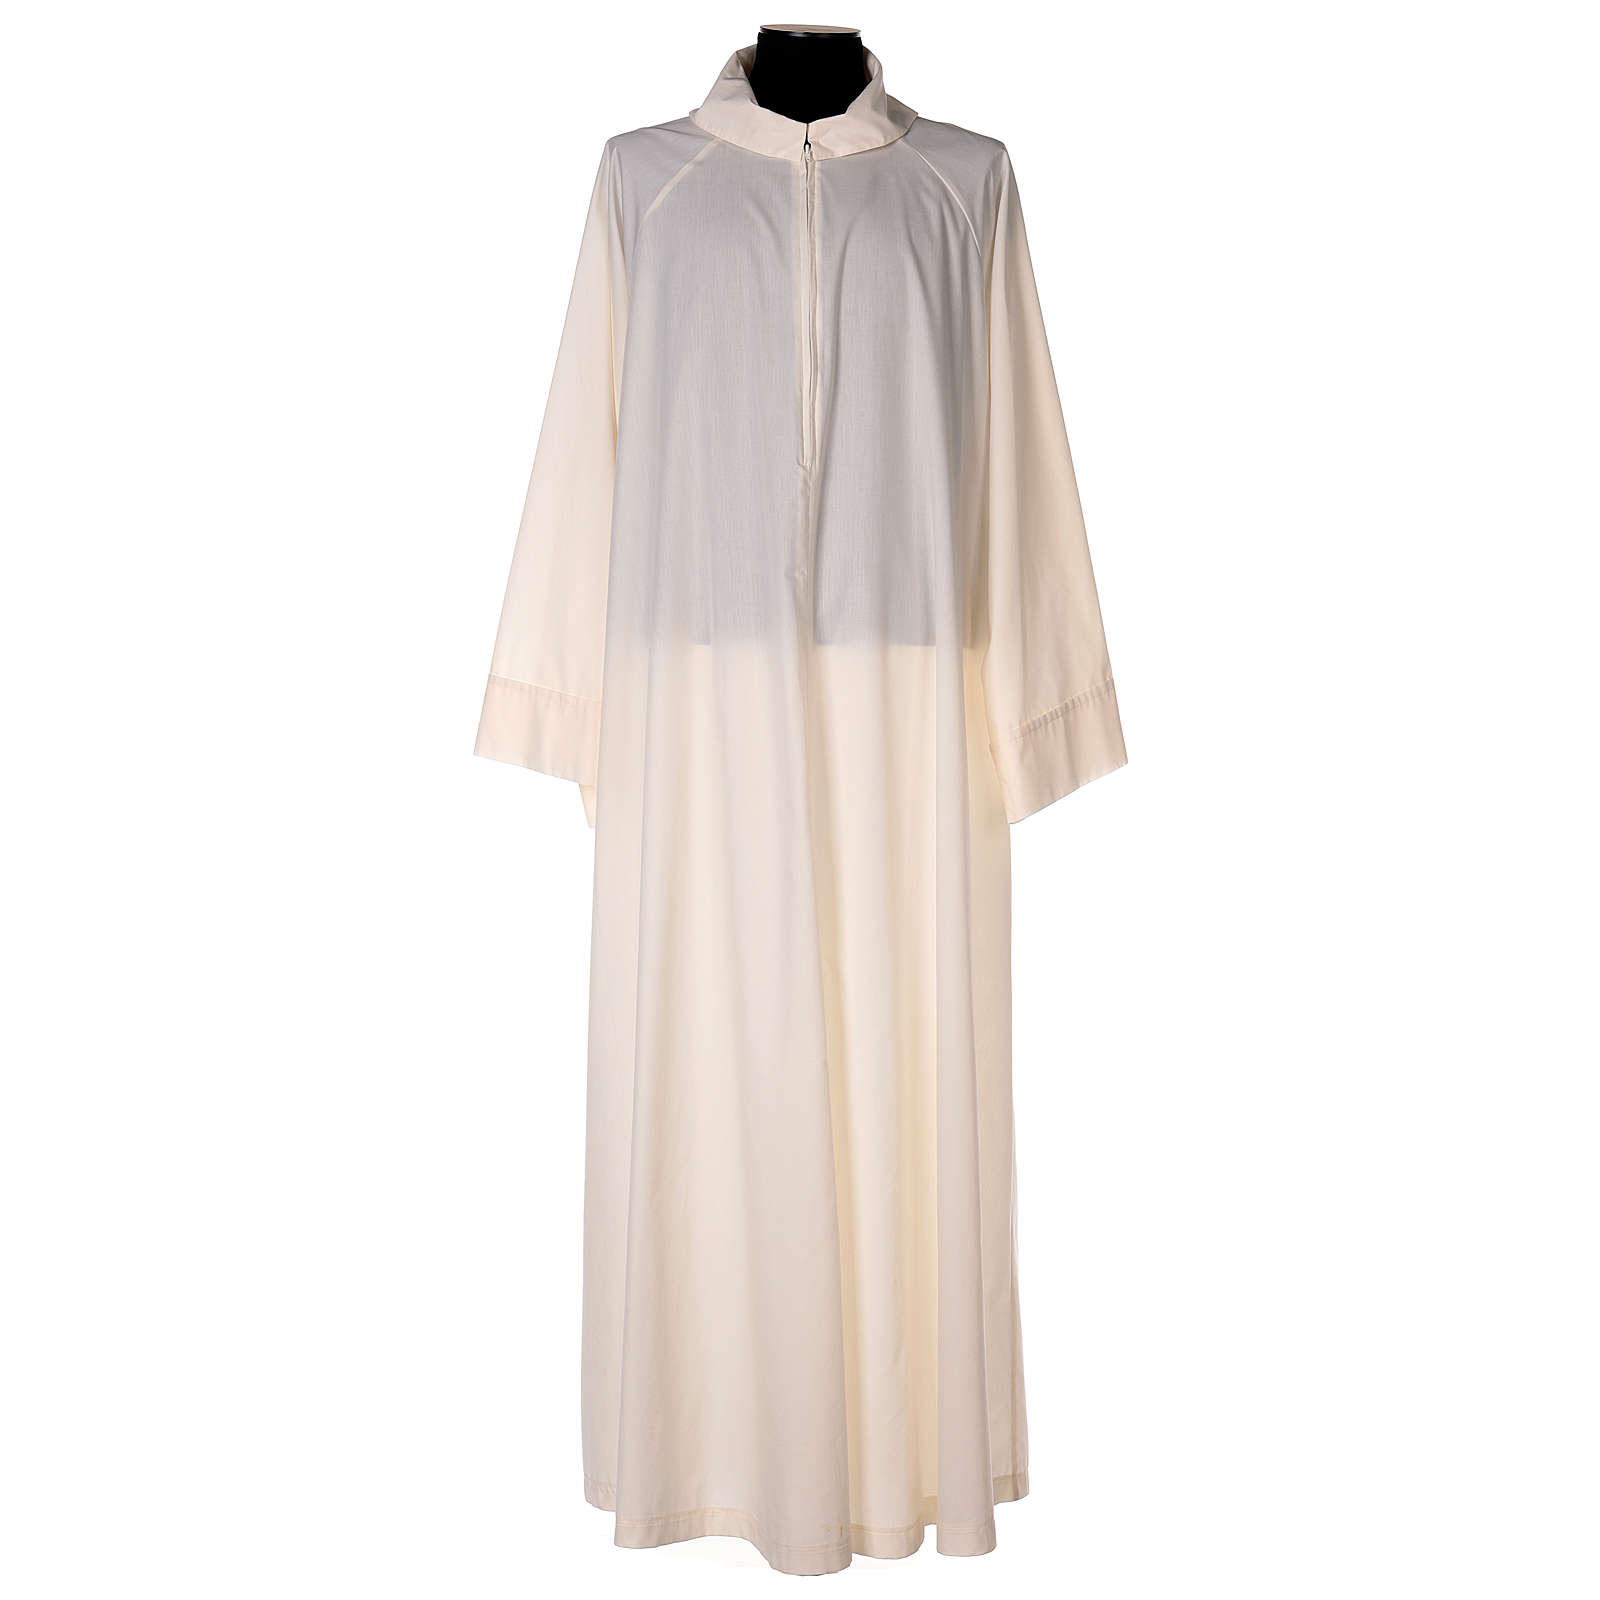 Ivory gown 65% polyester 35% cotton flared fake hood